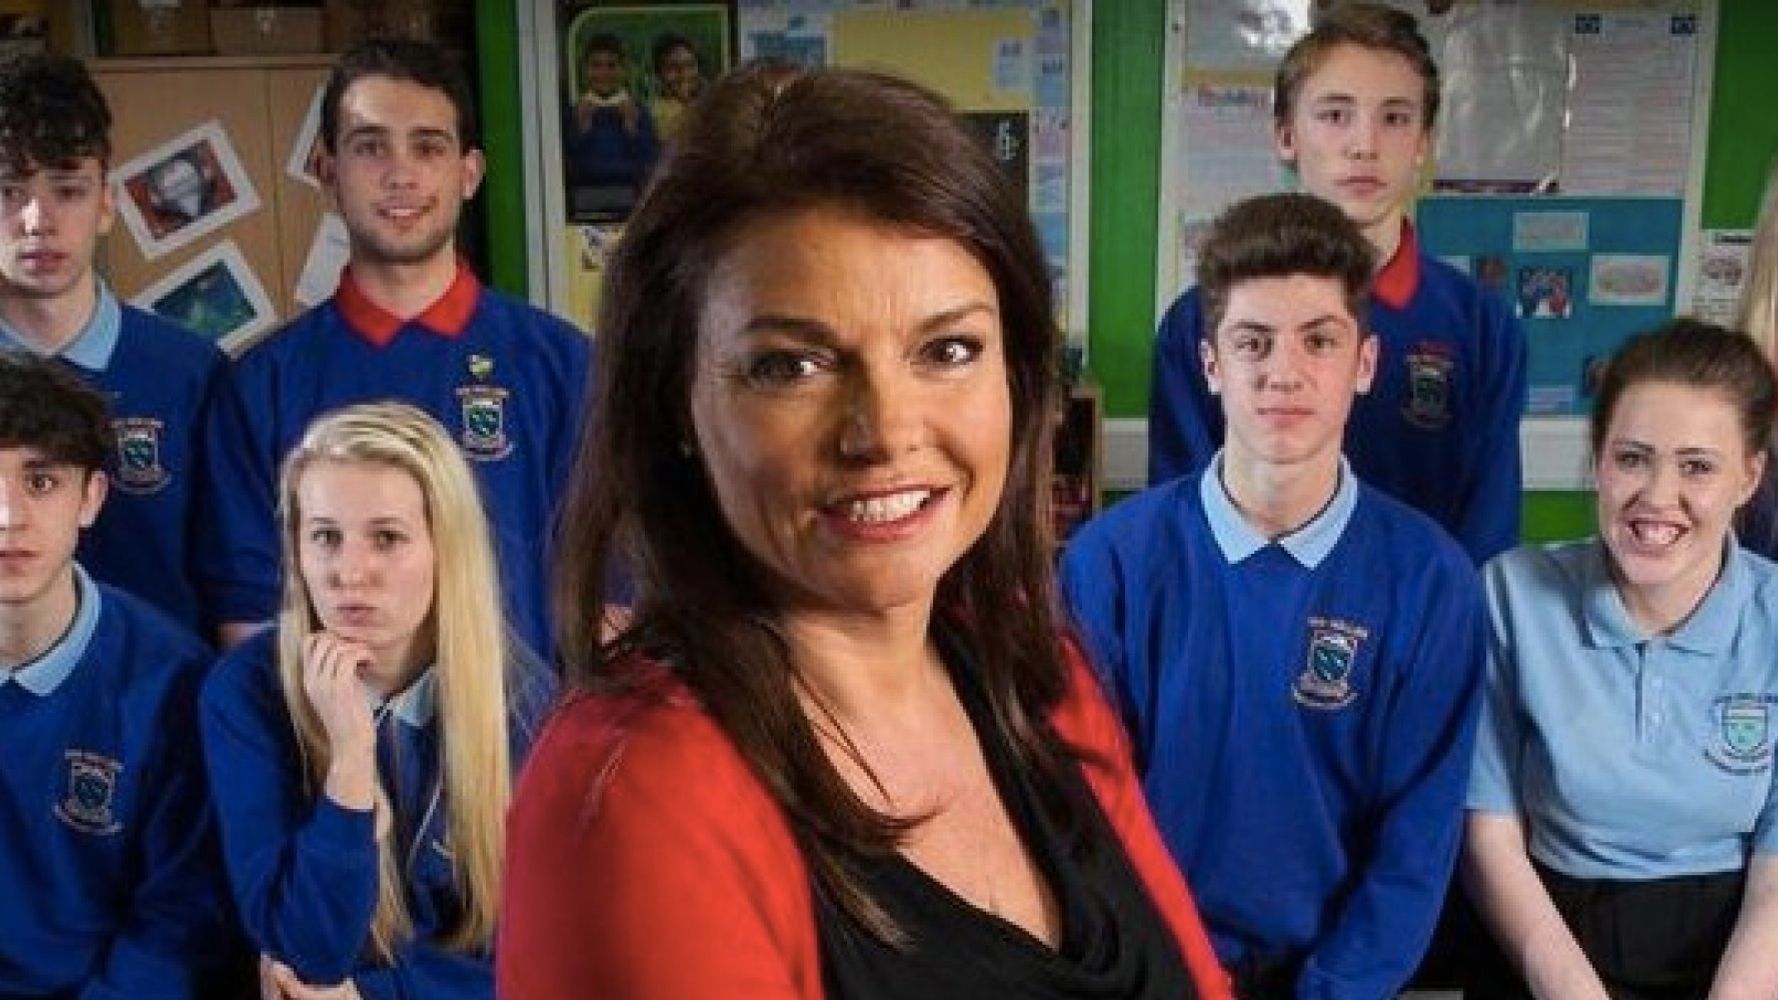 Highschoolsex - Sex Toys And Porn: One Teacher's Controversial Sex Ed Classes In A  Lancashire School To Be Aired On Channel 4 | HuffPost UK Students